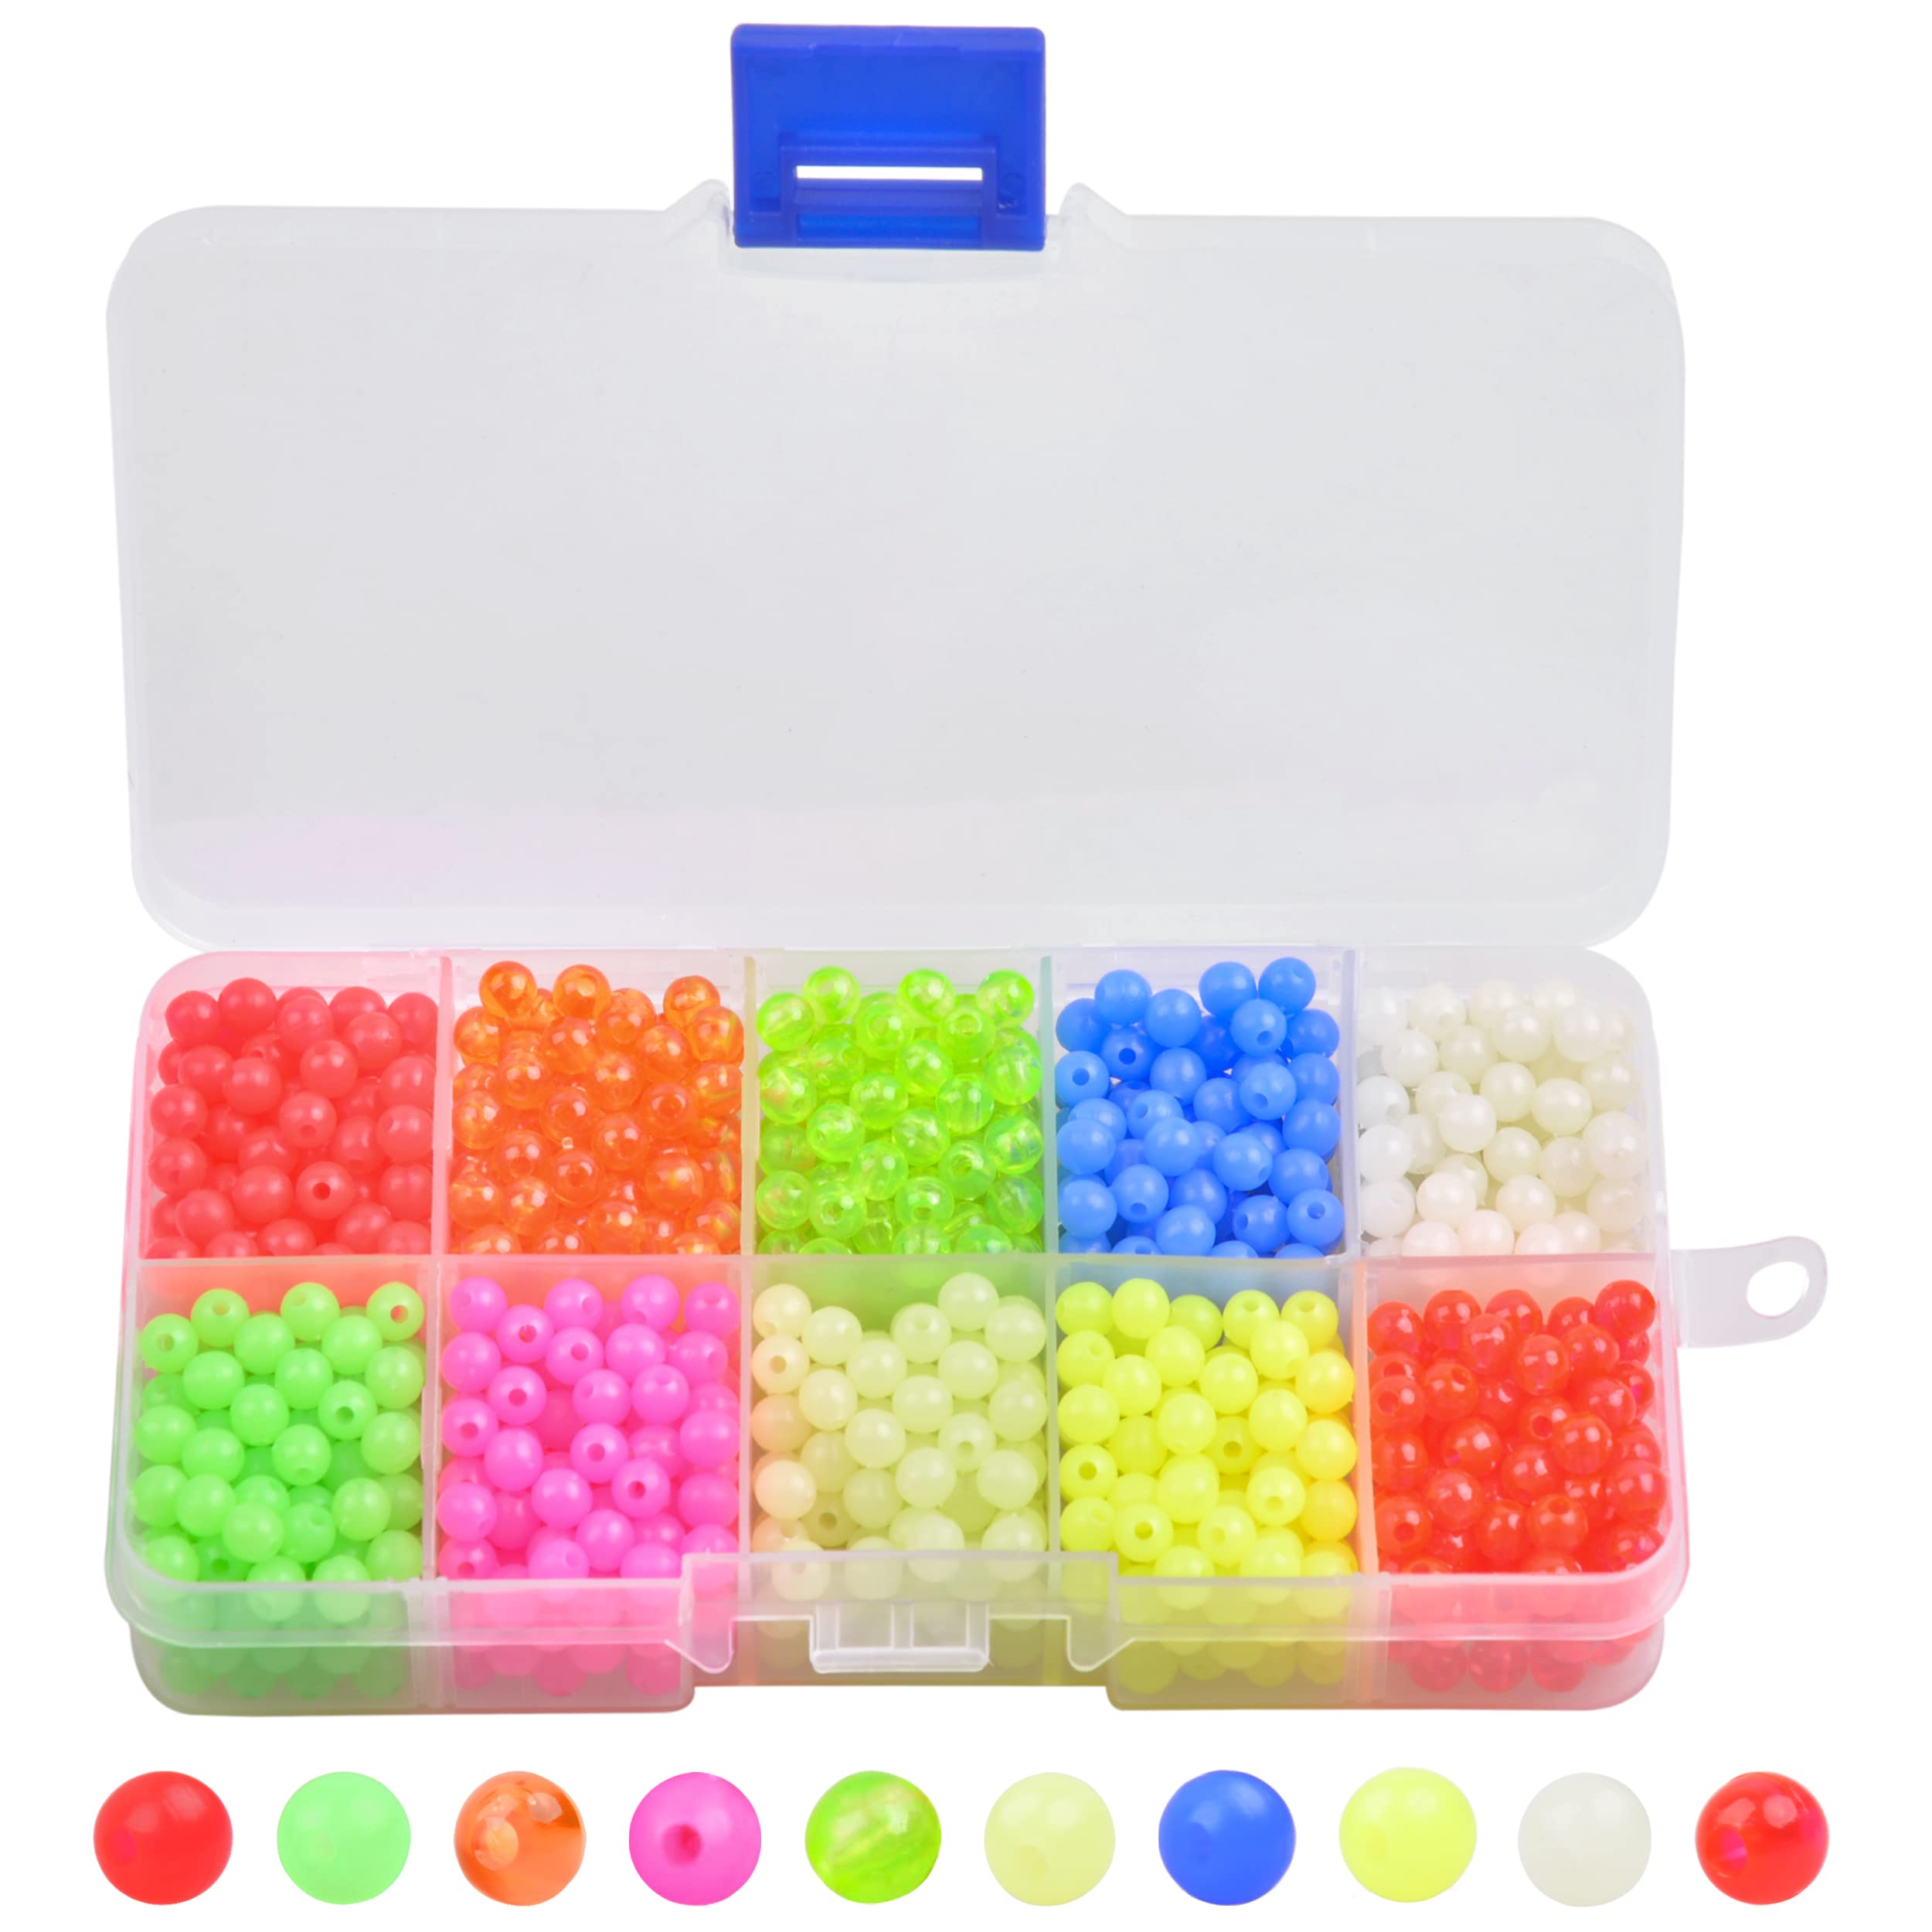 OROOTL Fishing Beads Assorted Kit - 1000pcs 5mm Round Float Glow